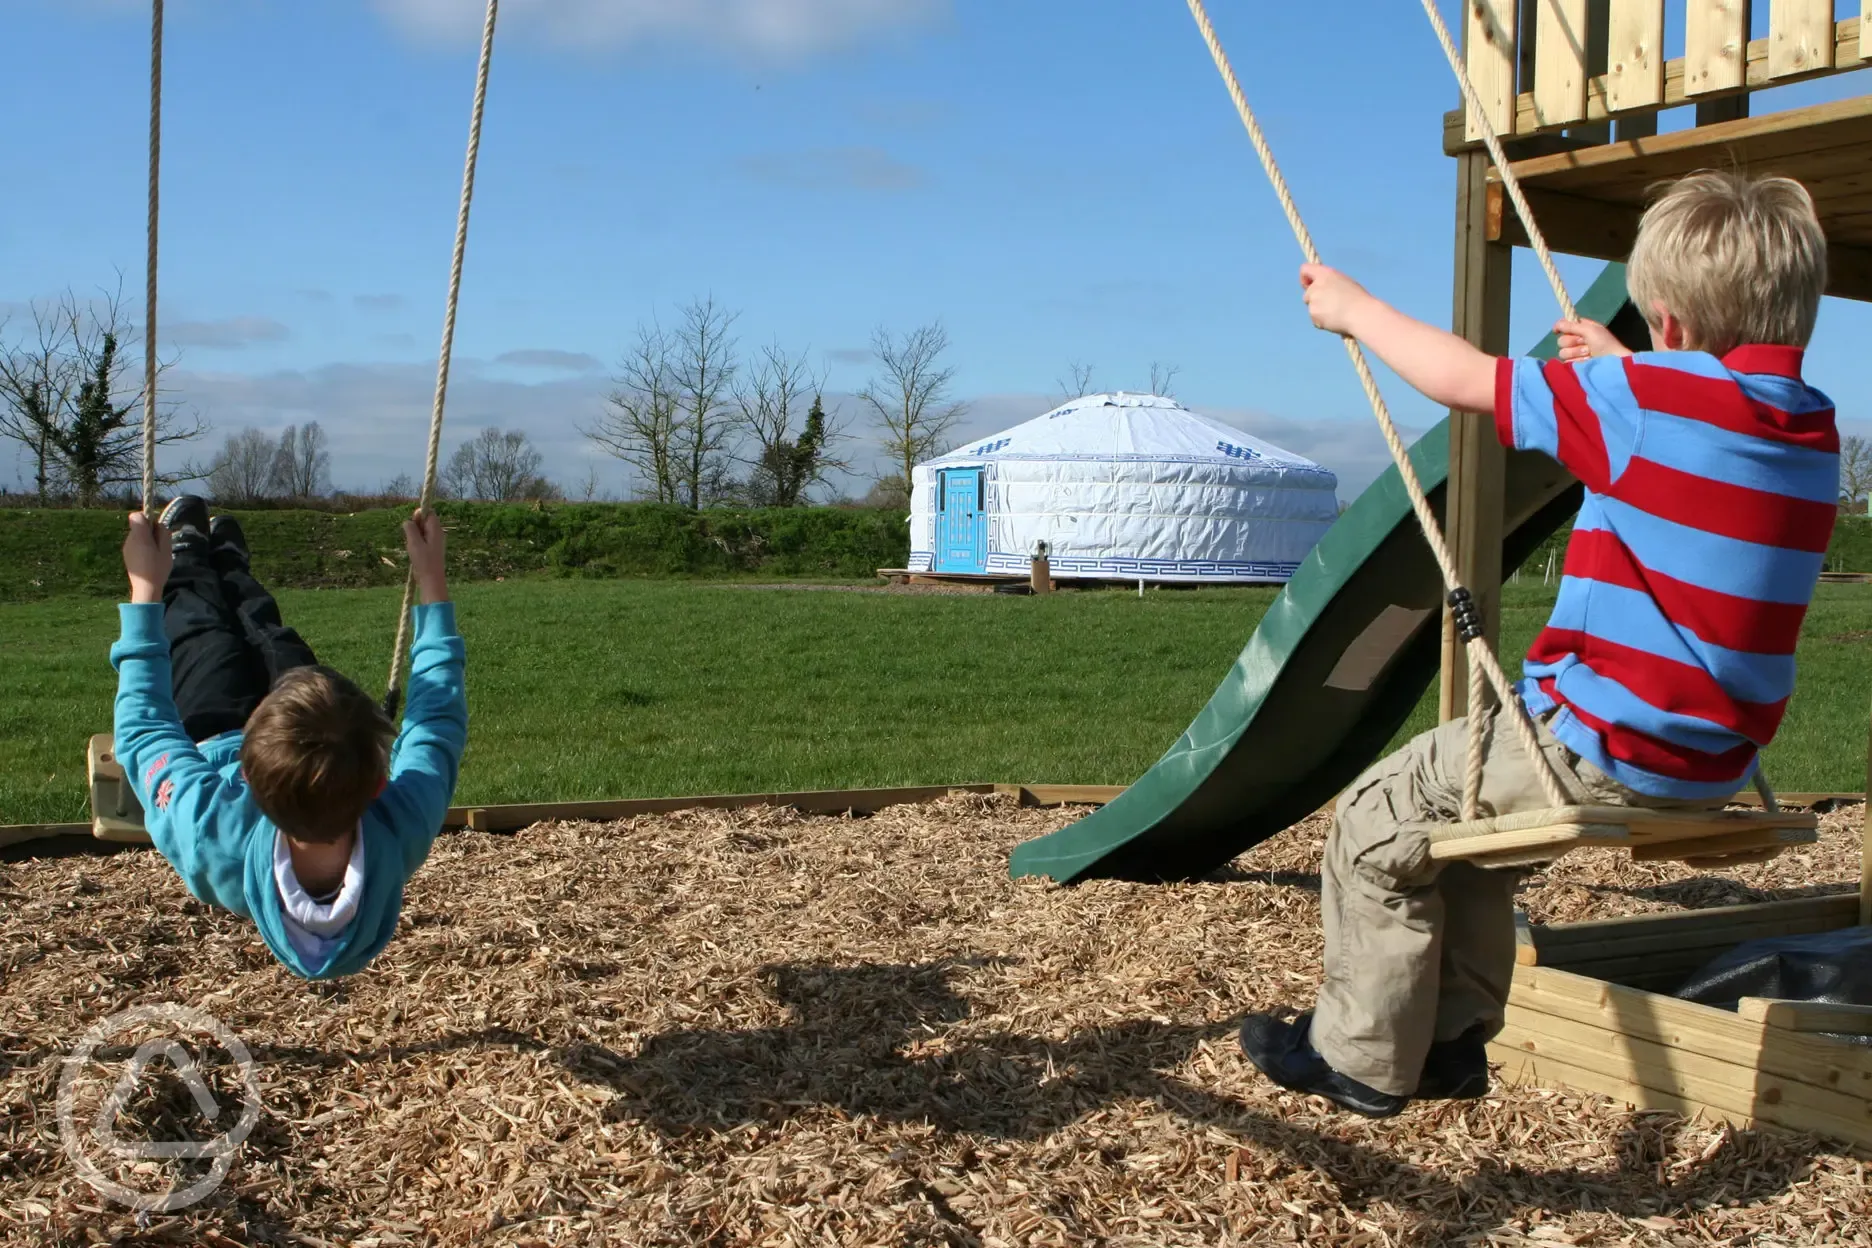 Children are free to explore safely in our secure lanscaped paddock and have fun on our wooden play equipment